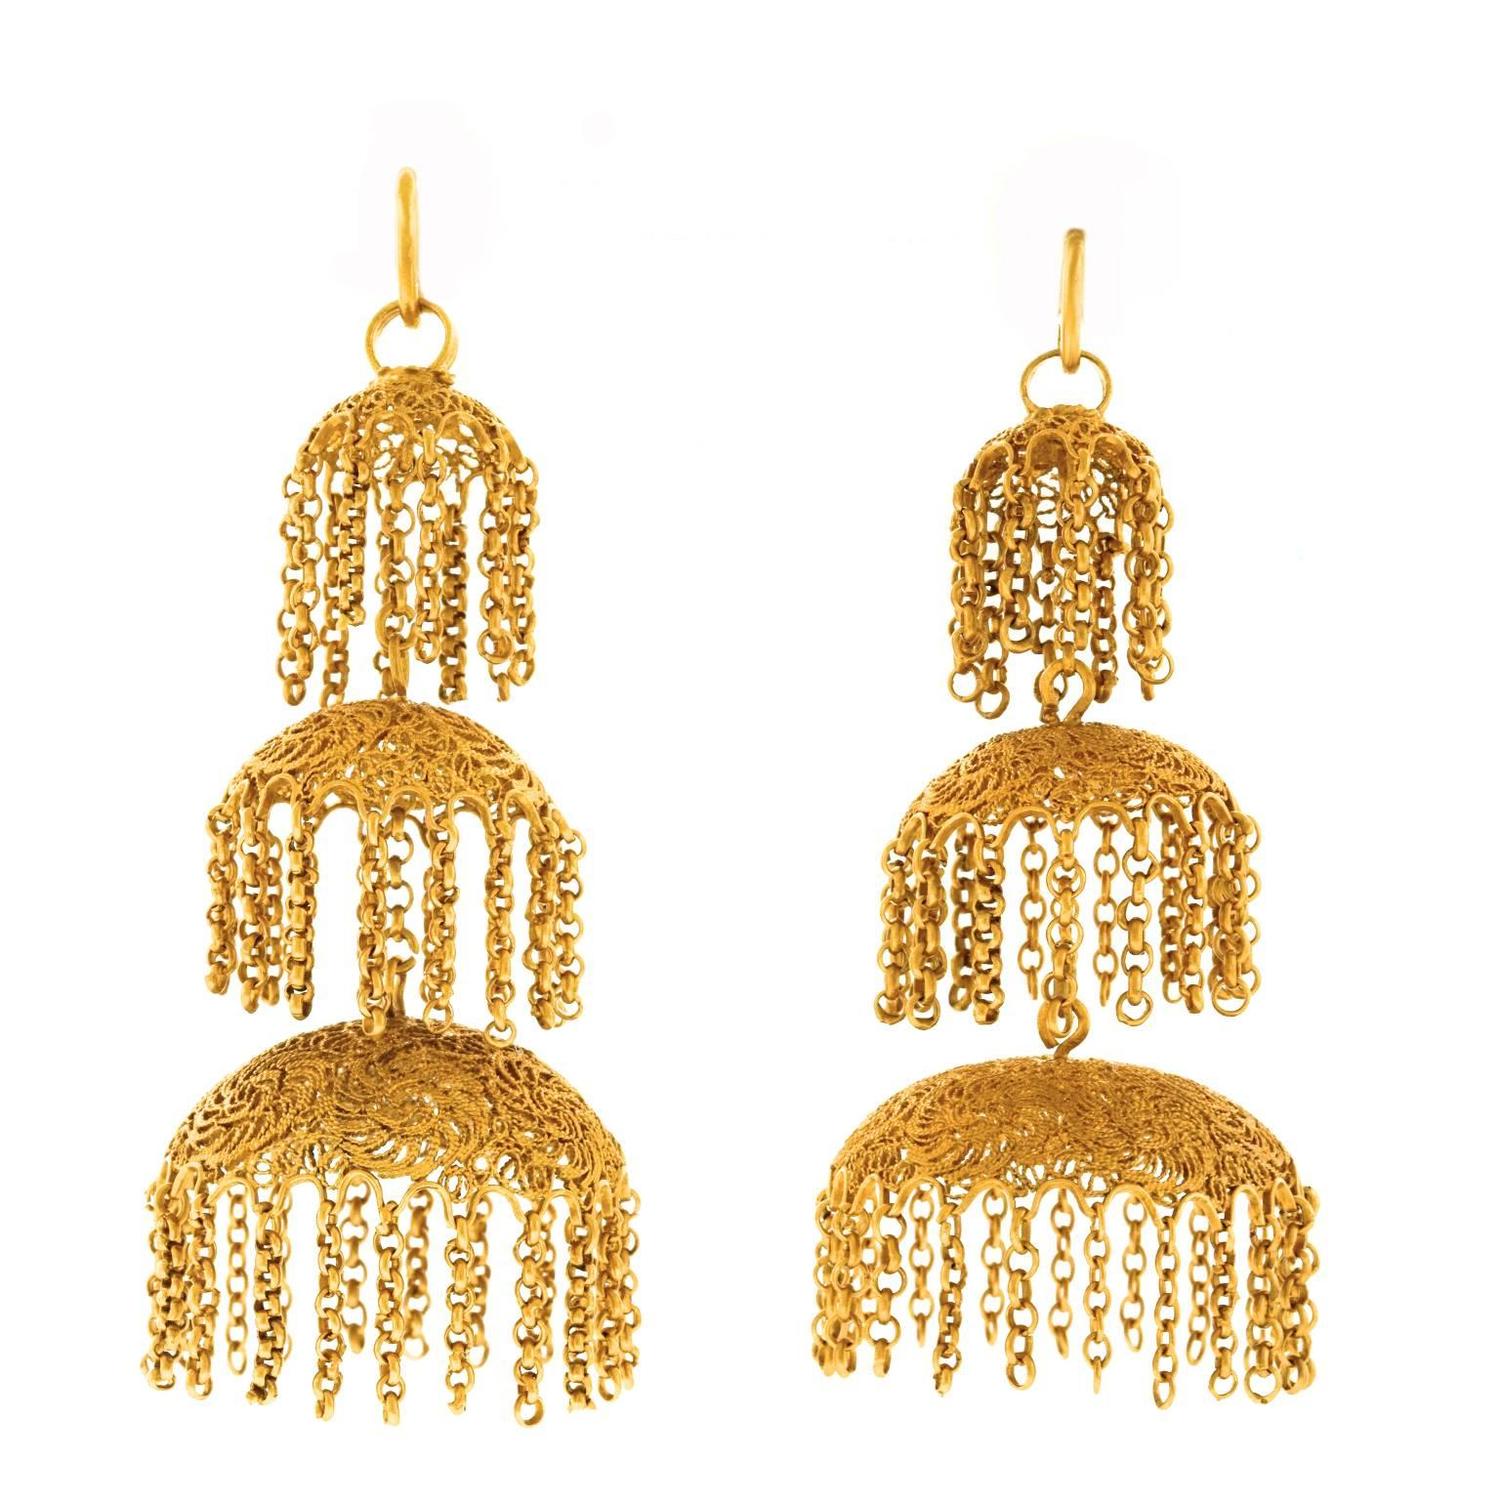 Antique Anglo-Indian Chandelier 22k Gold Earrings For Sale at 1stdibs